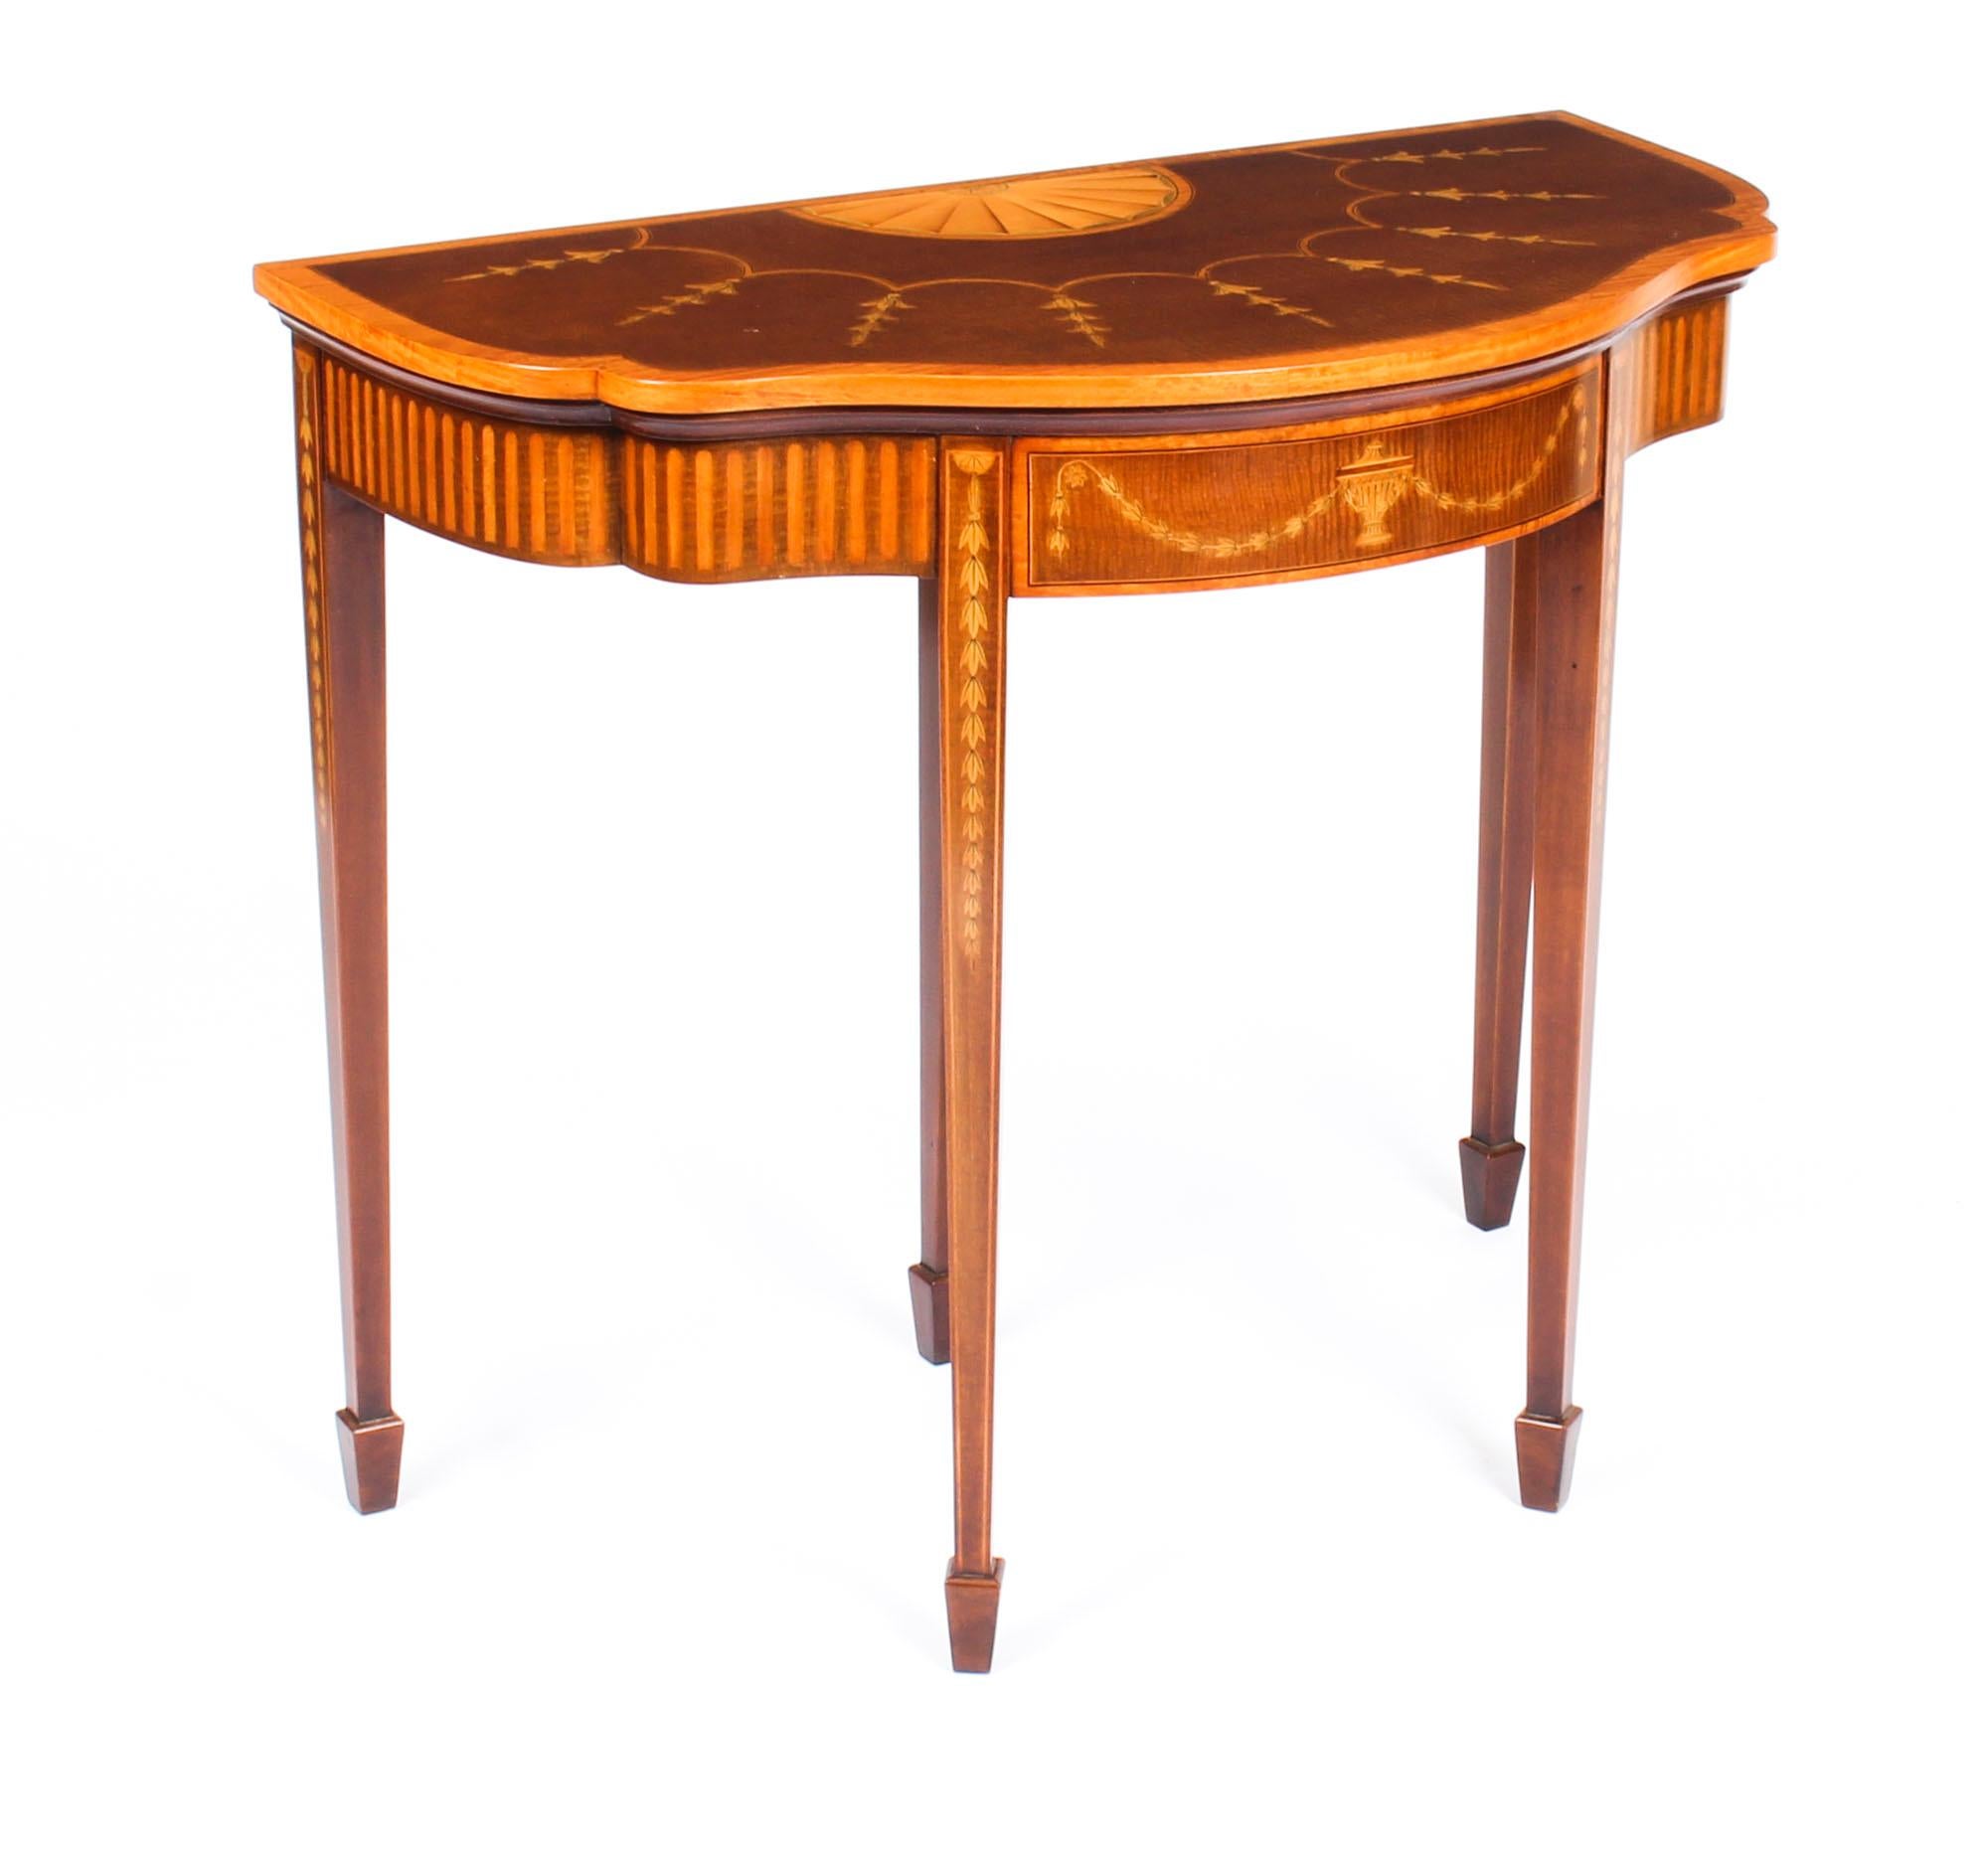 This is a stunning antique George III revival serpentine card table, circa 1880 in date.

This splendid card table features a fold over top with beautiful inlaid marquetry decoration of columns of bluebells and a delightful half-moon starburst.
